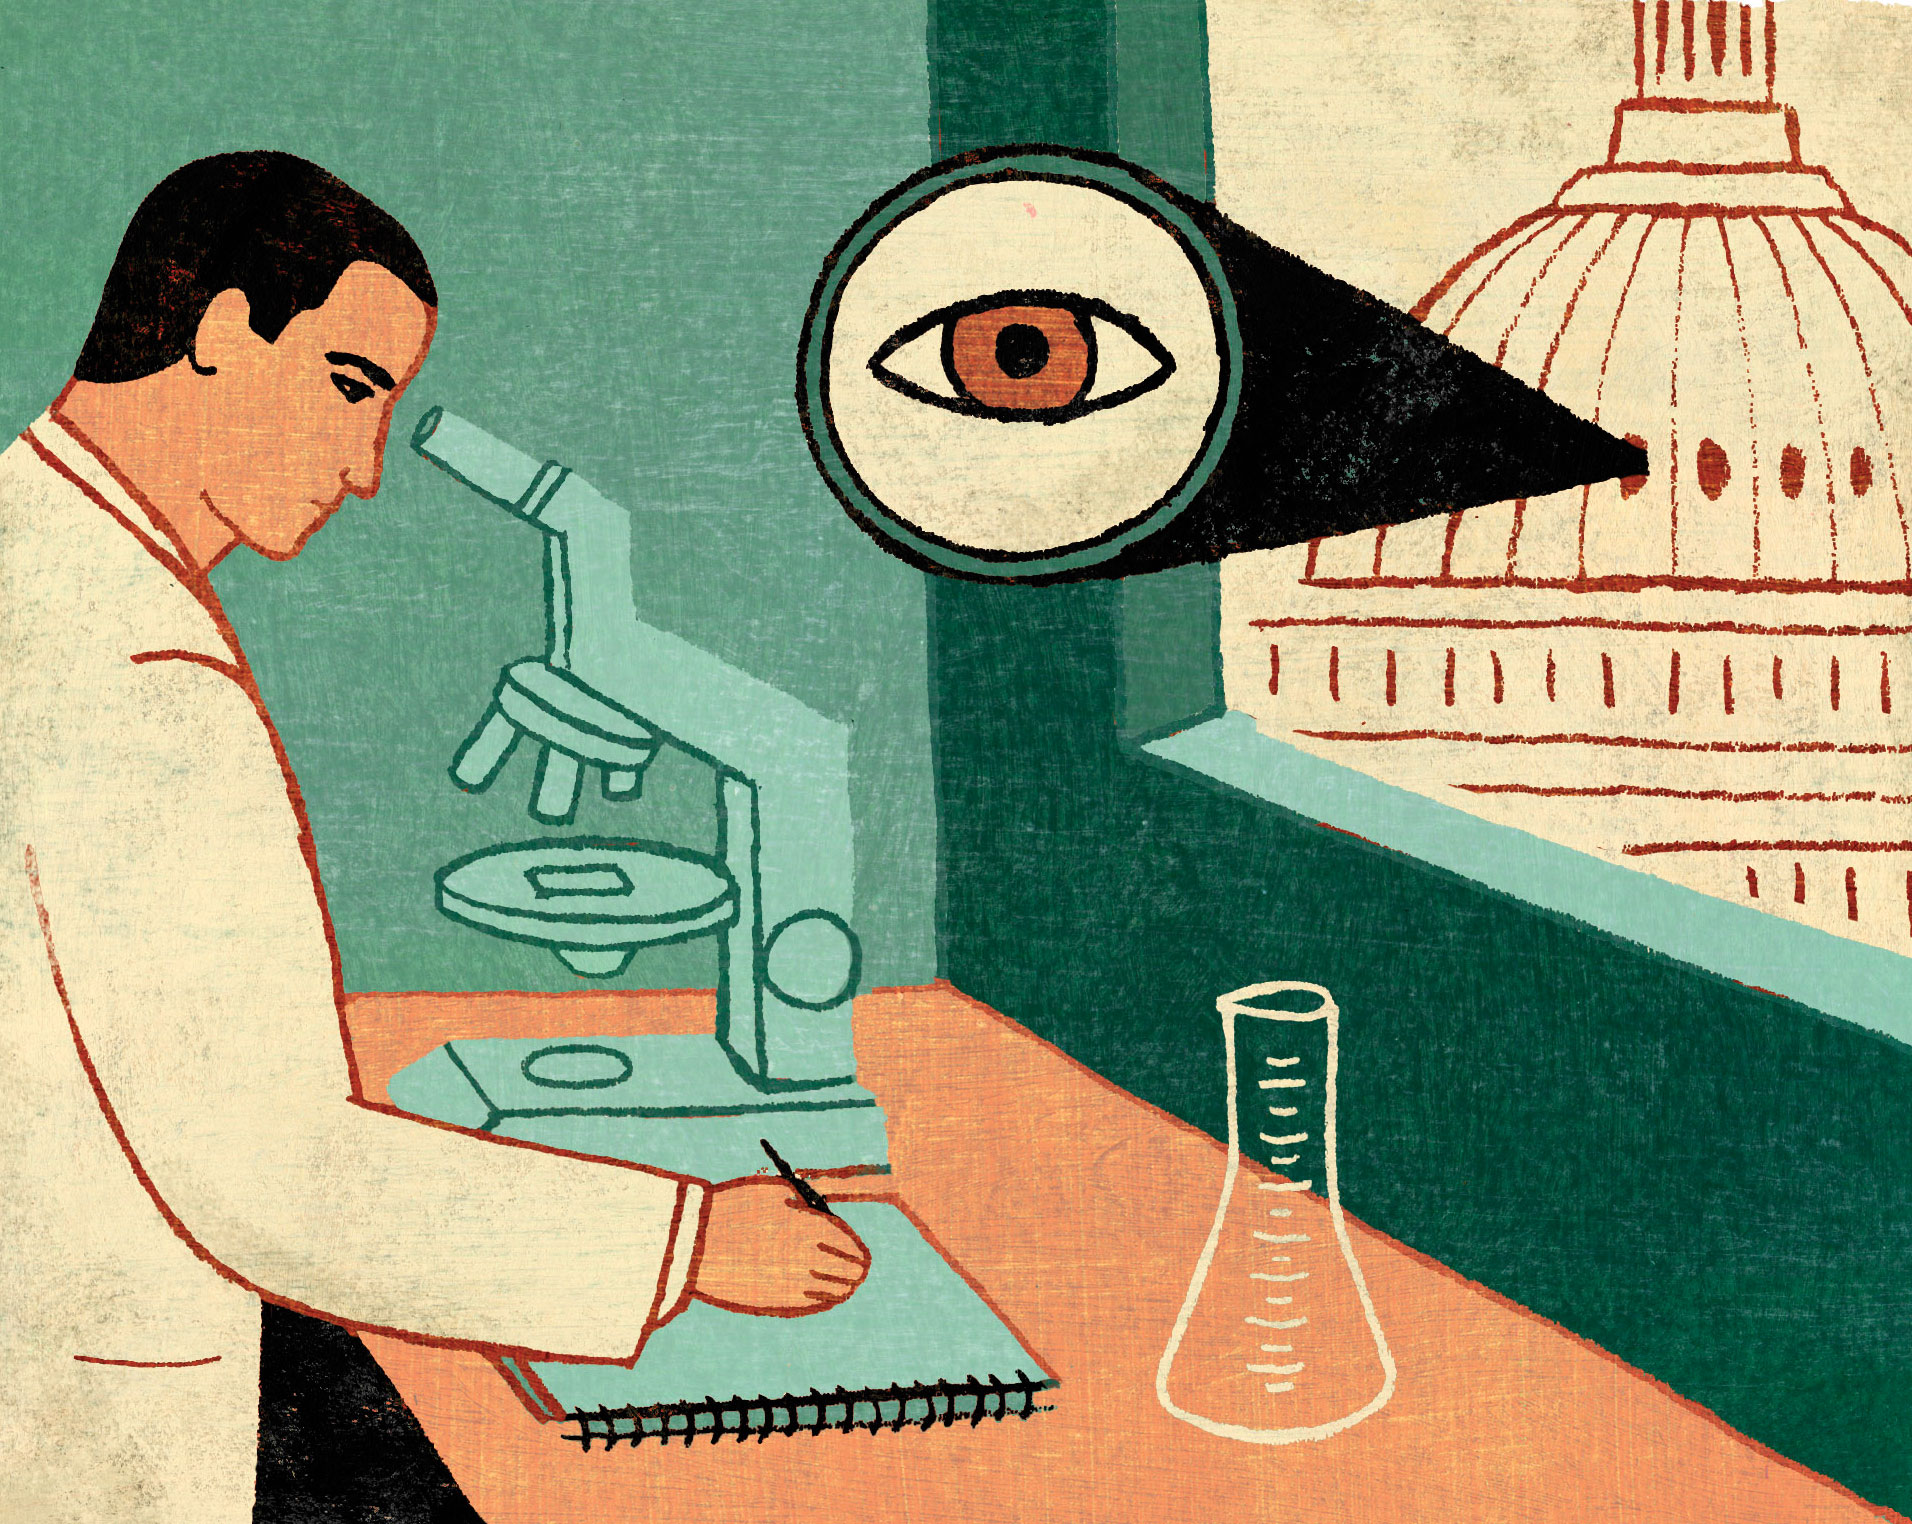 Illustration of a scientist looking through a microscope as the White House spies on him with a giant eye